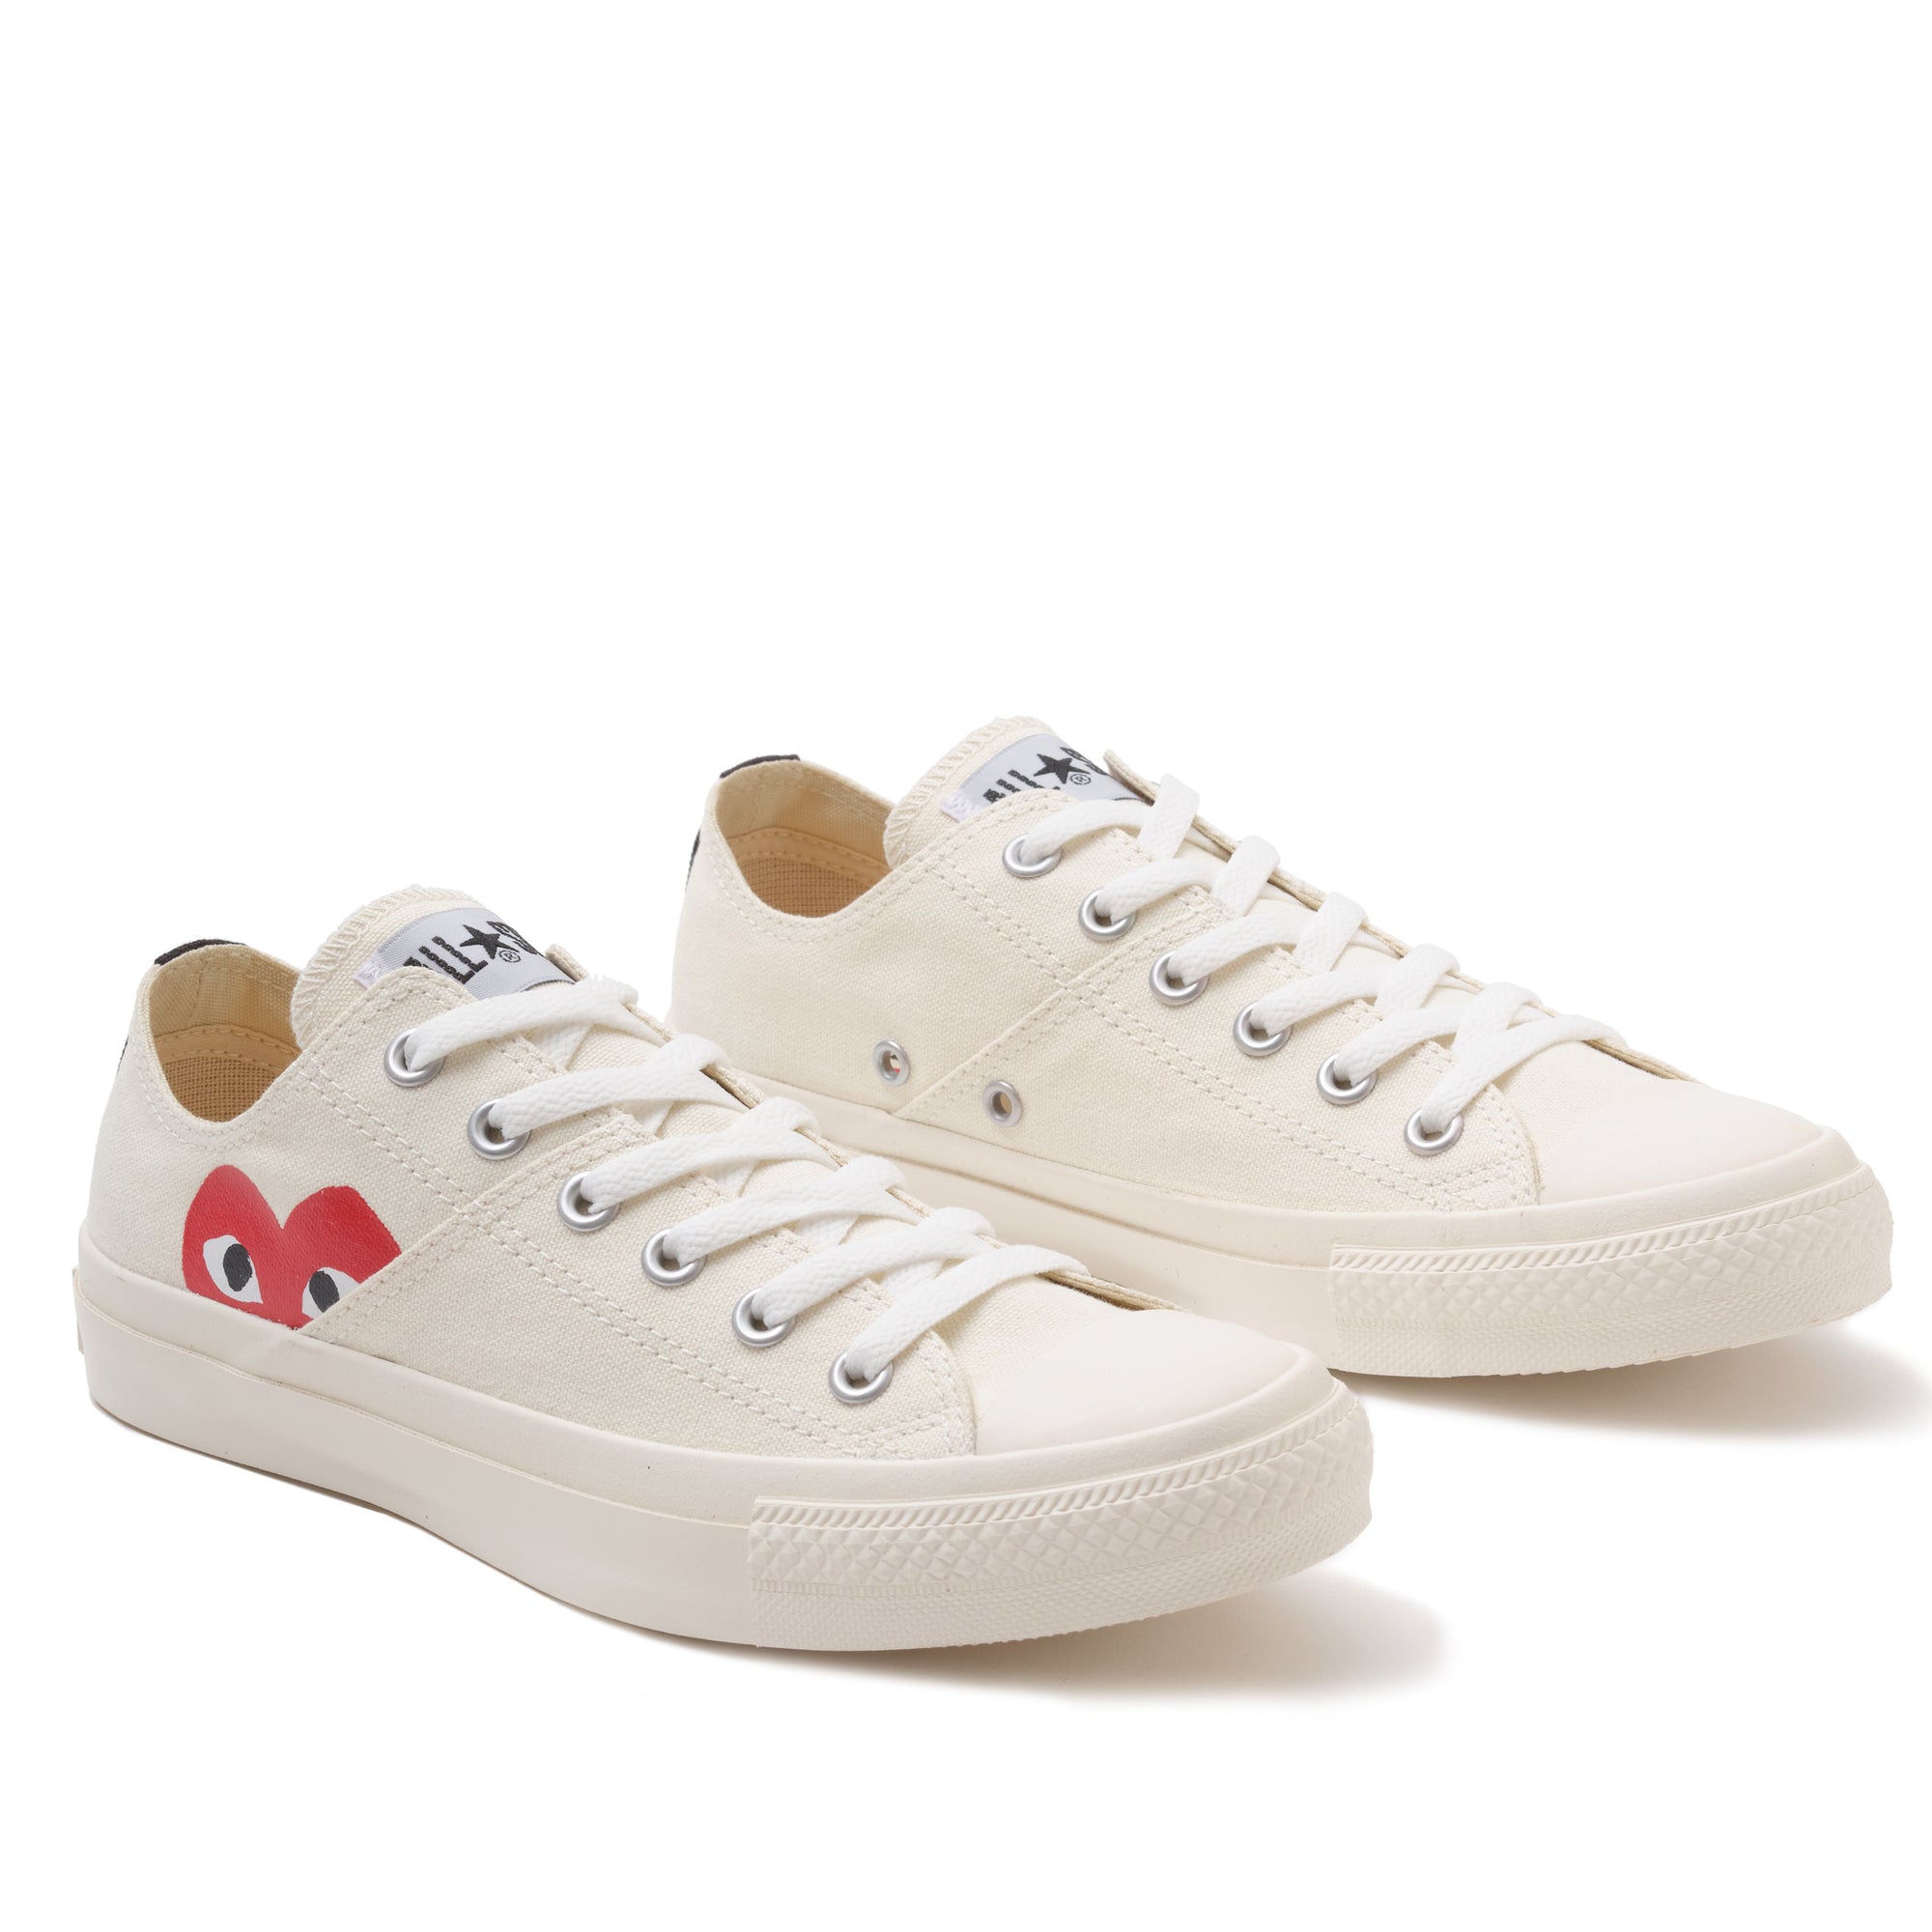 PLAY CDG CONVERSE - ALL STAR LOW - (WHITE) view 3